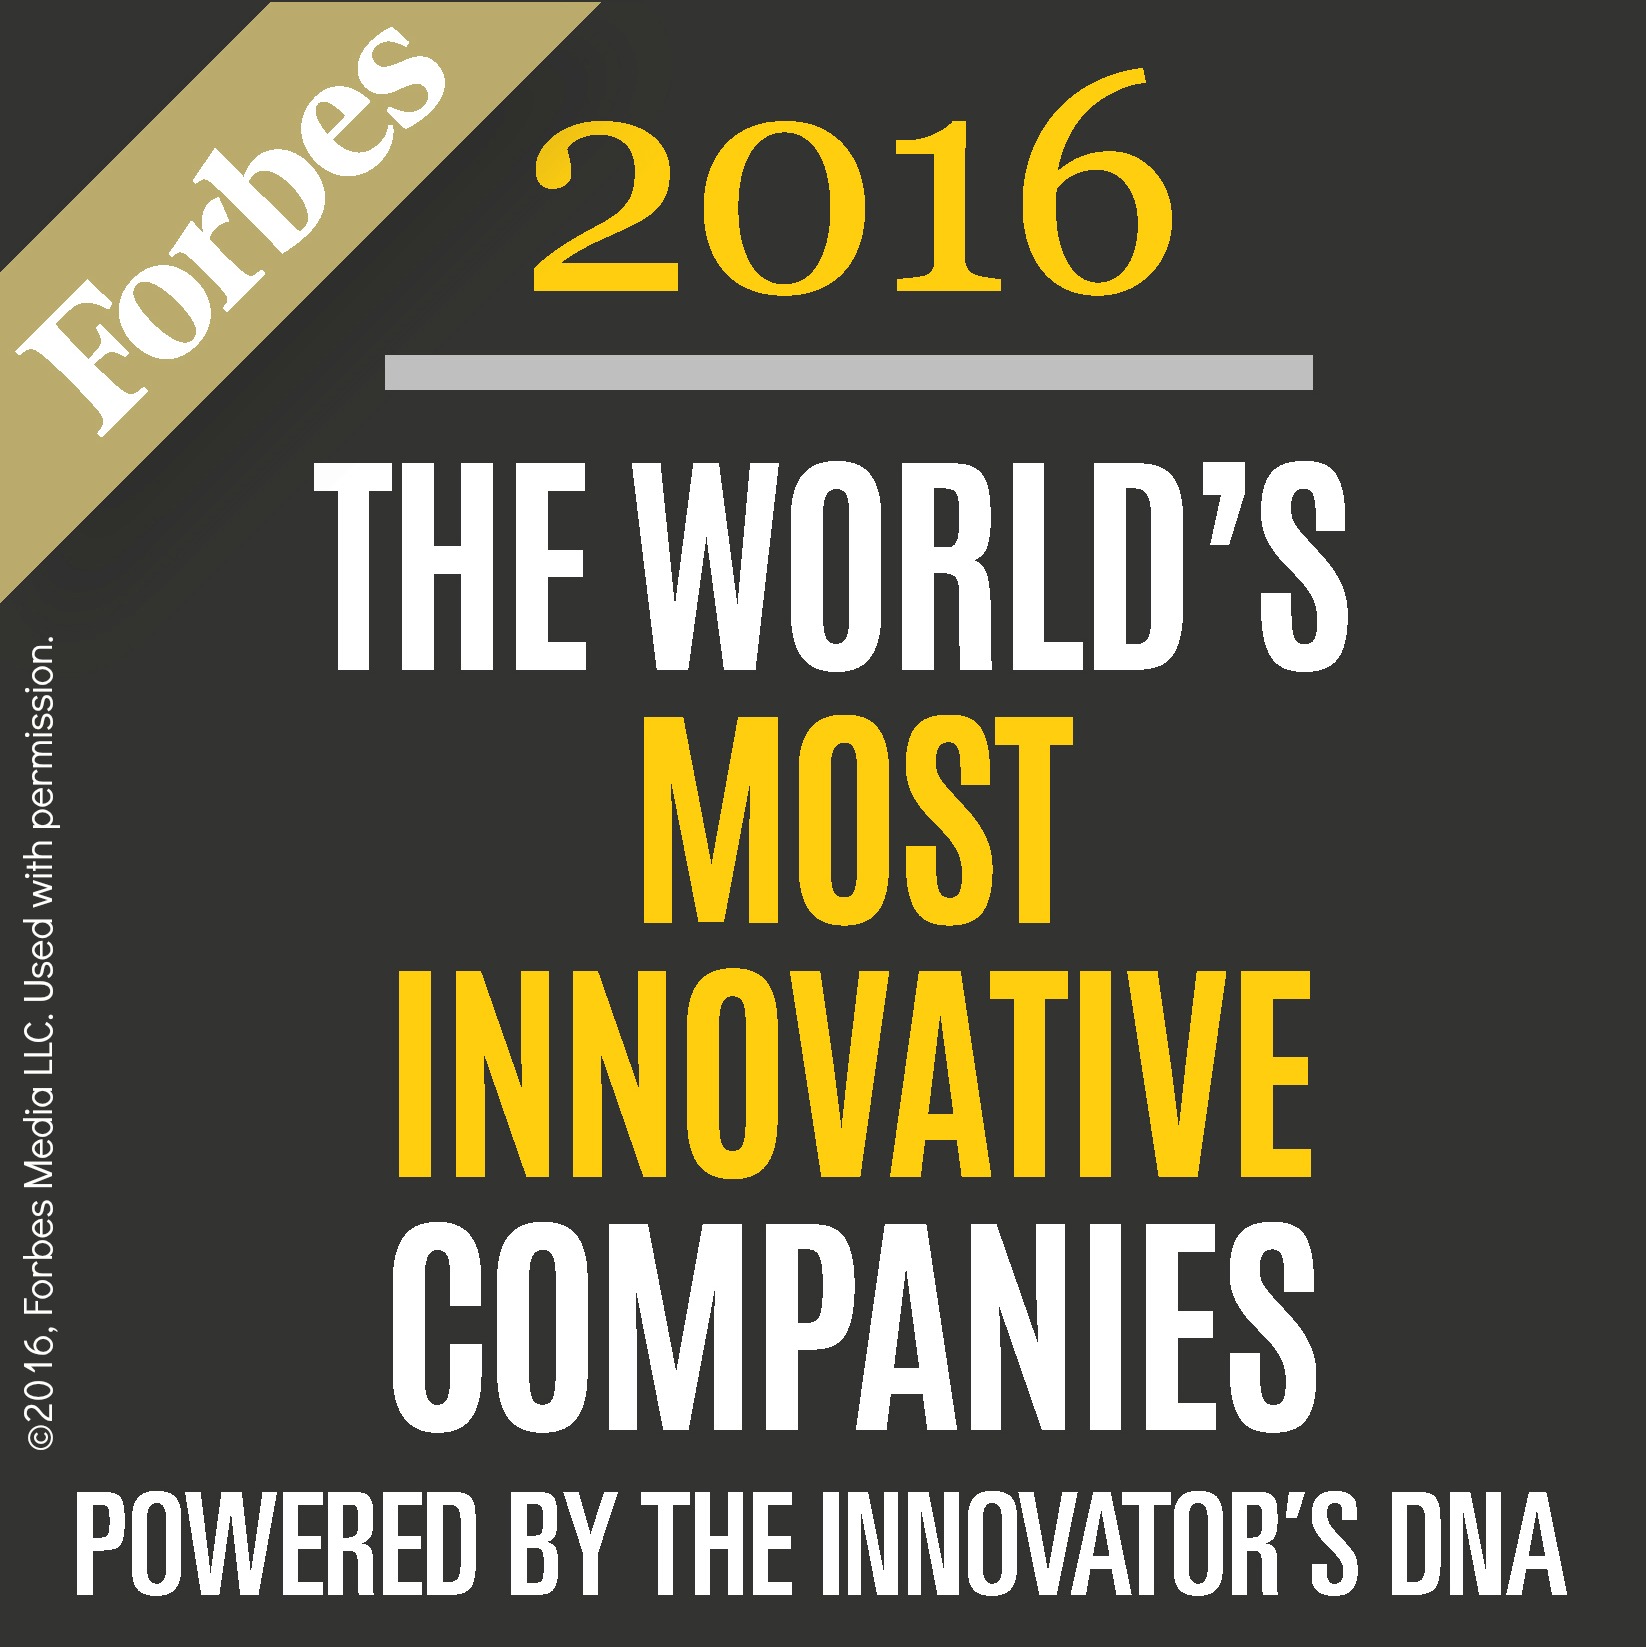 Forbes names Experian Among Top 100 “World’s Most Innovative Companies